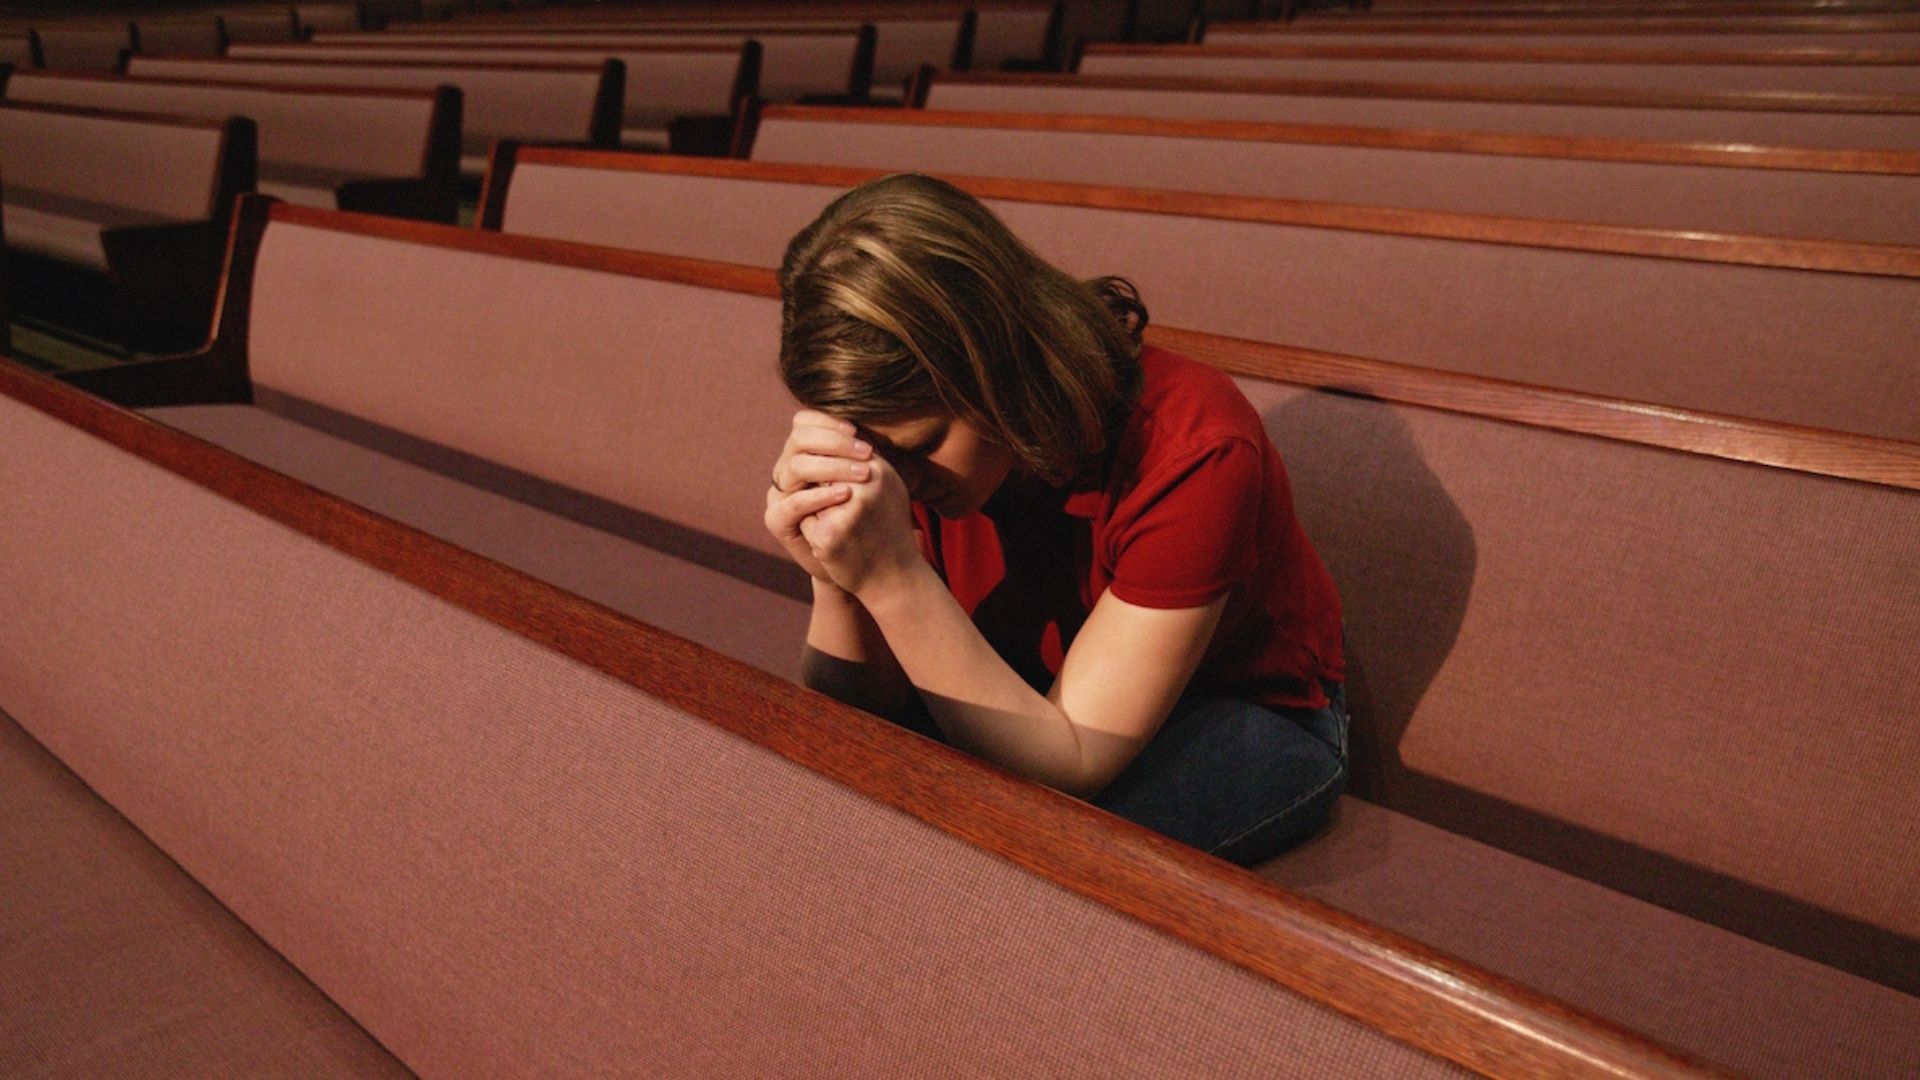 a lady sitting in a church with benches showing the impact of religion on mental health